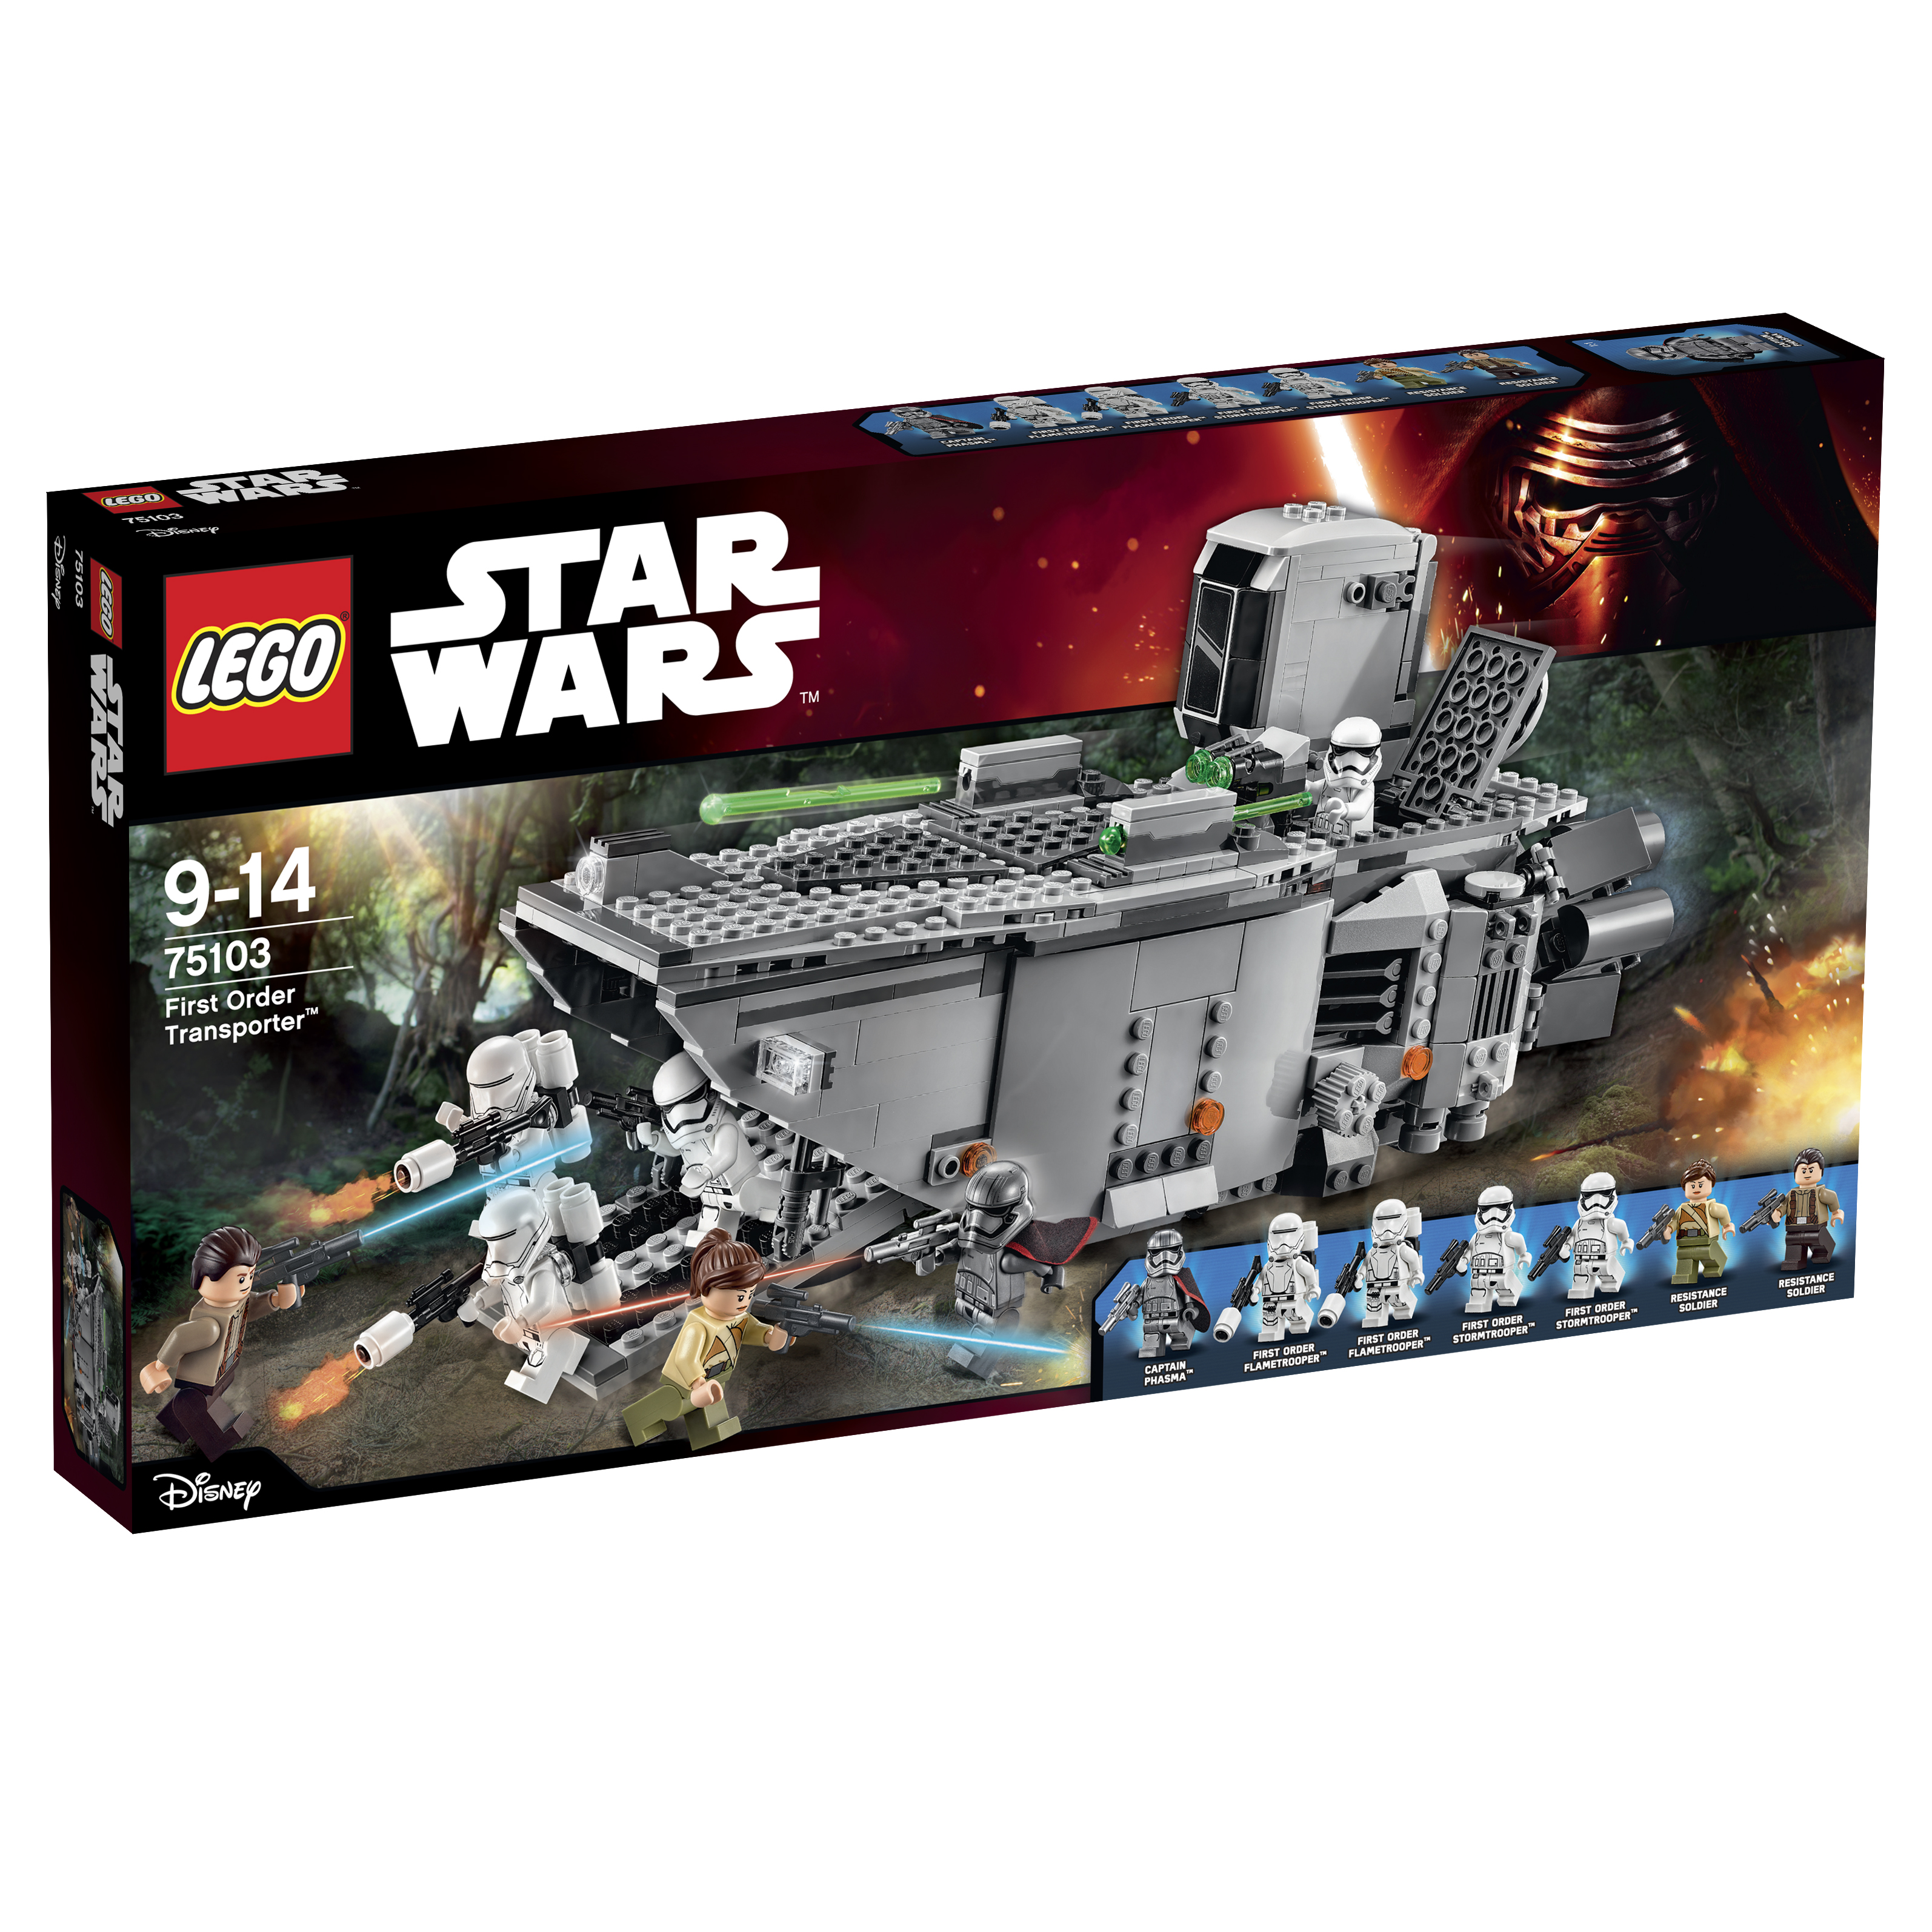 LEGO Officially Unveils Most Of The Force Awakens Sets - FBTB